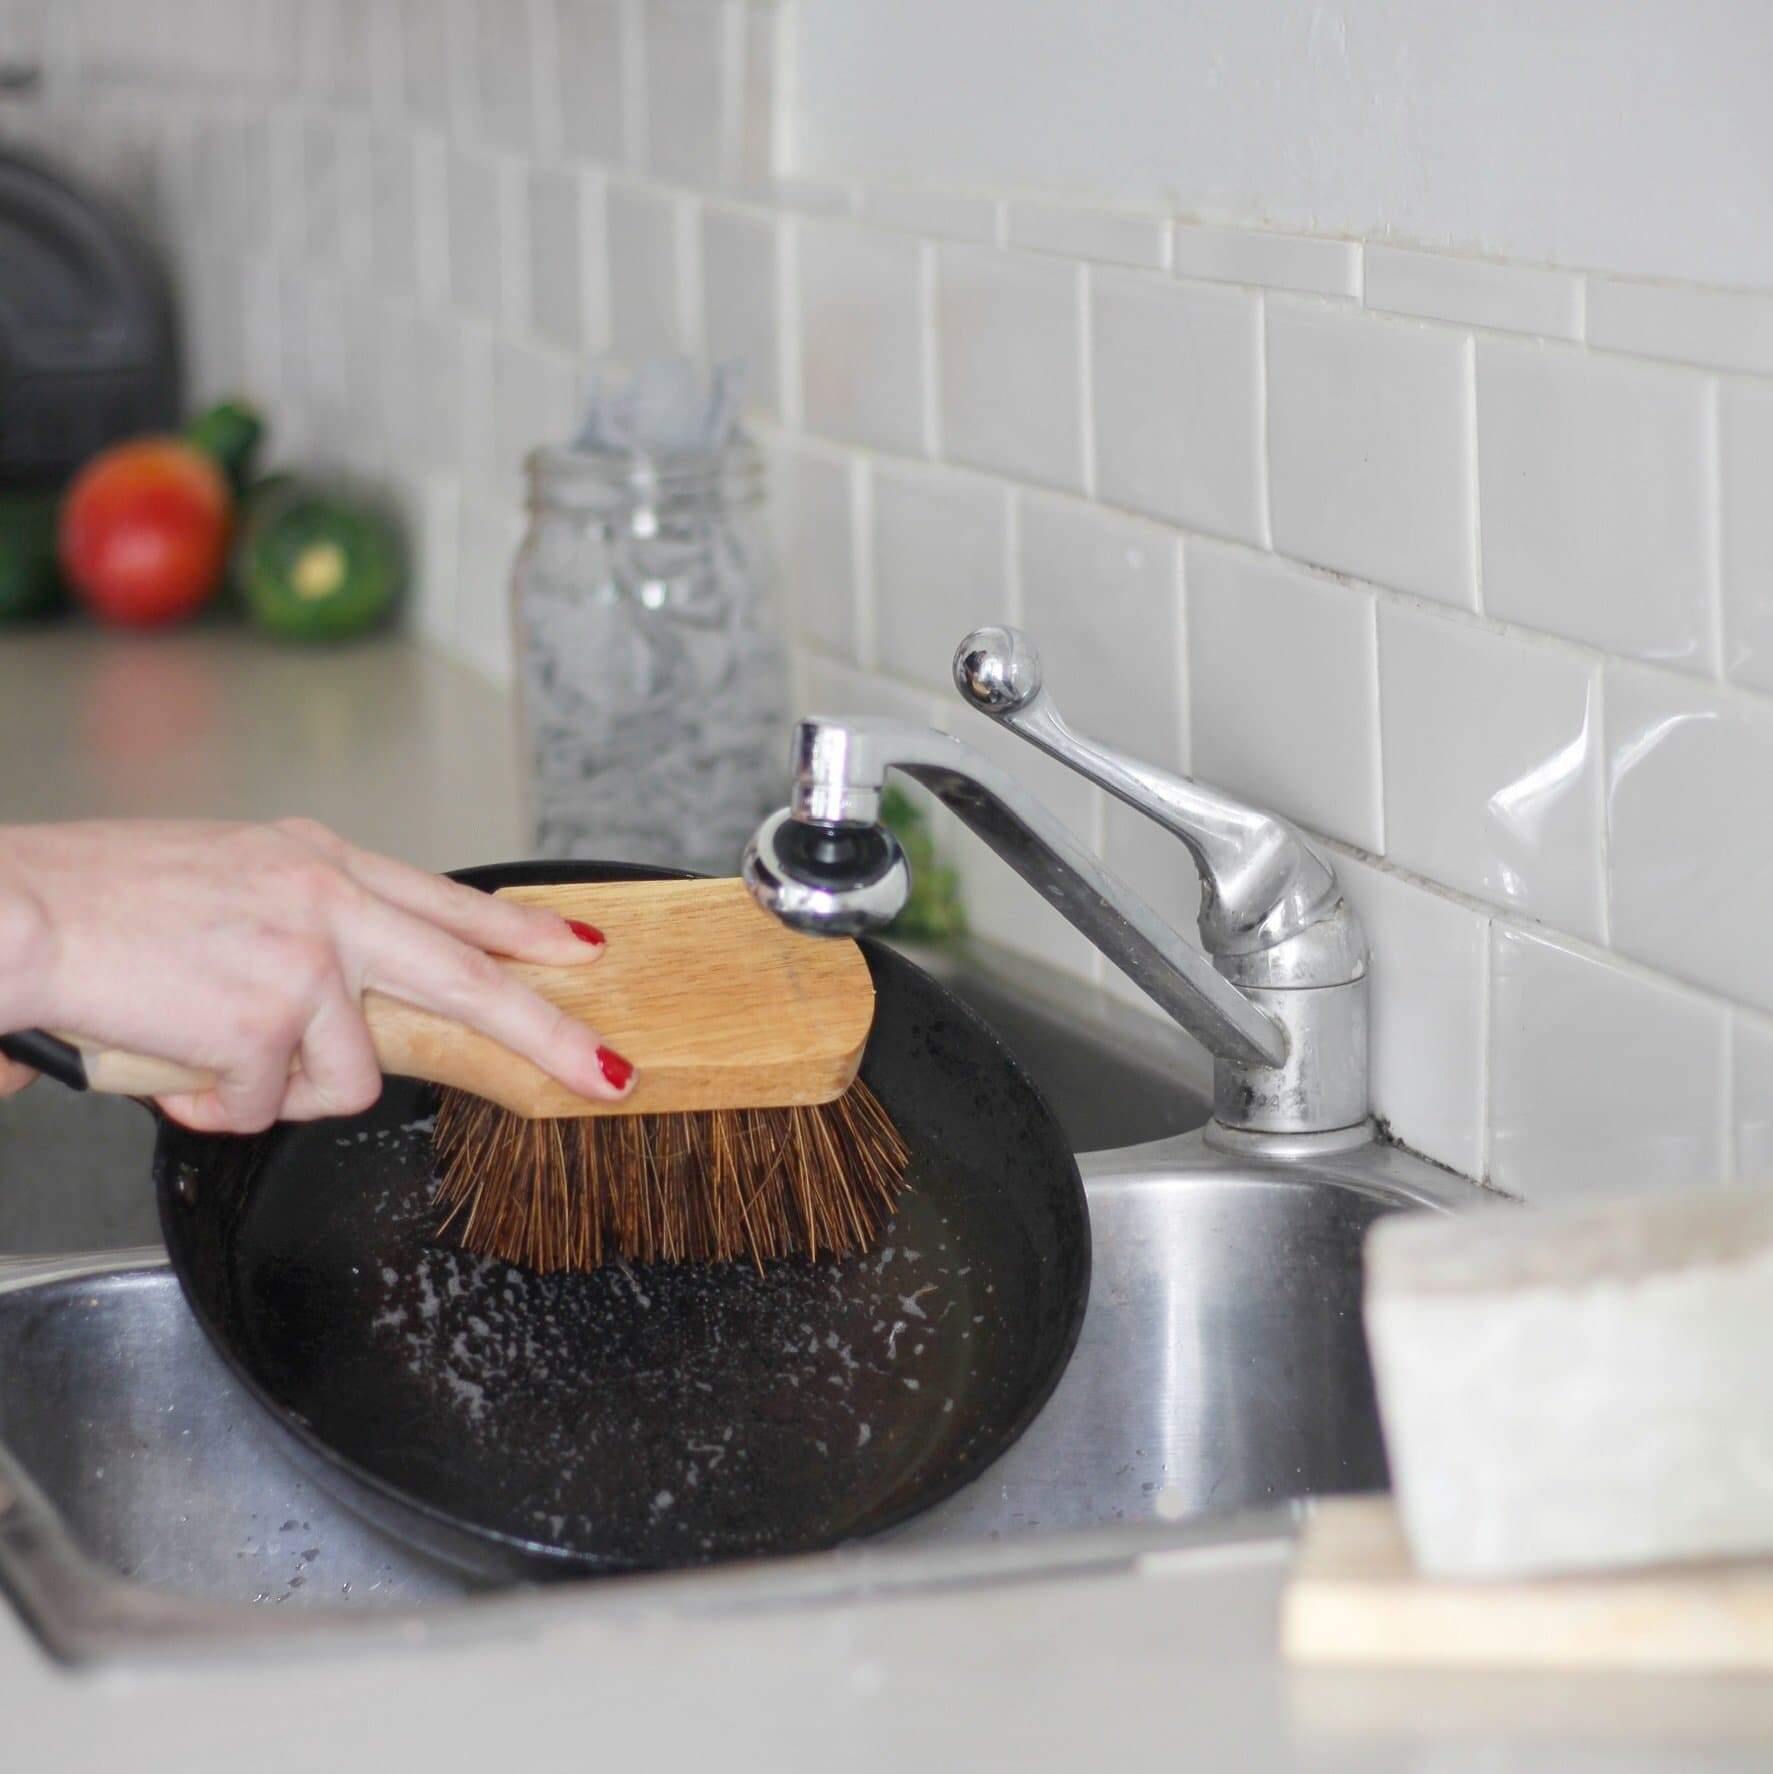 A woman scrubbing a pan over a sink with a wooden scrub brush with a white tiled background.